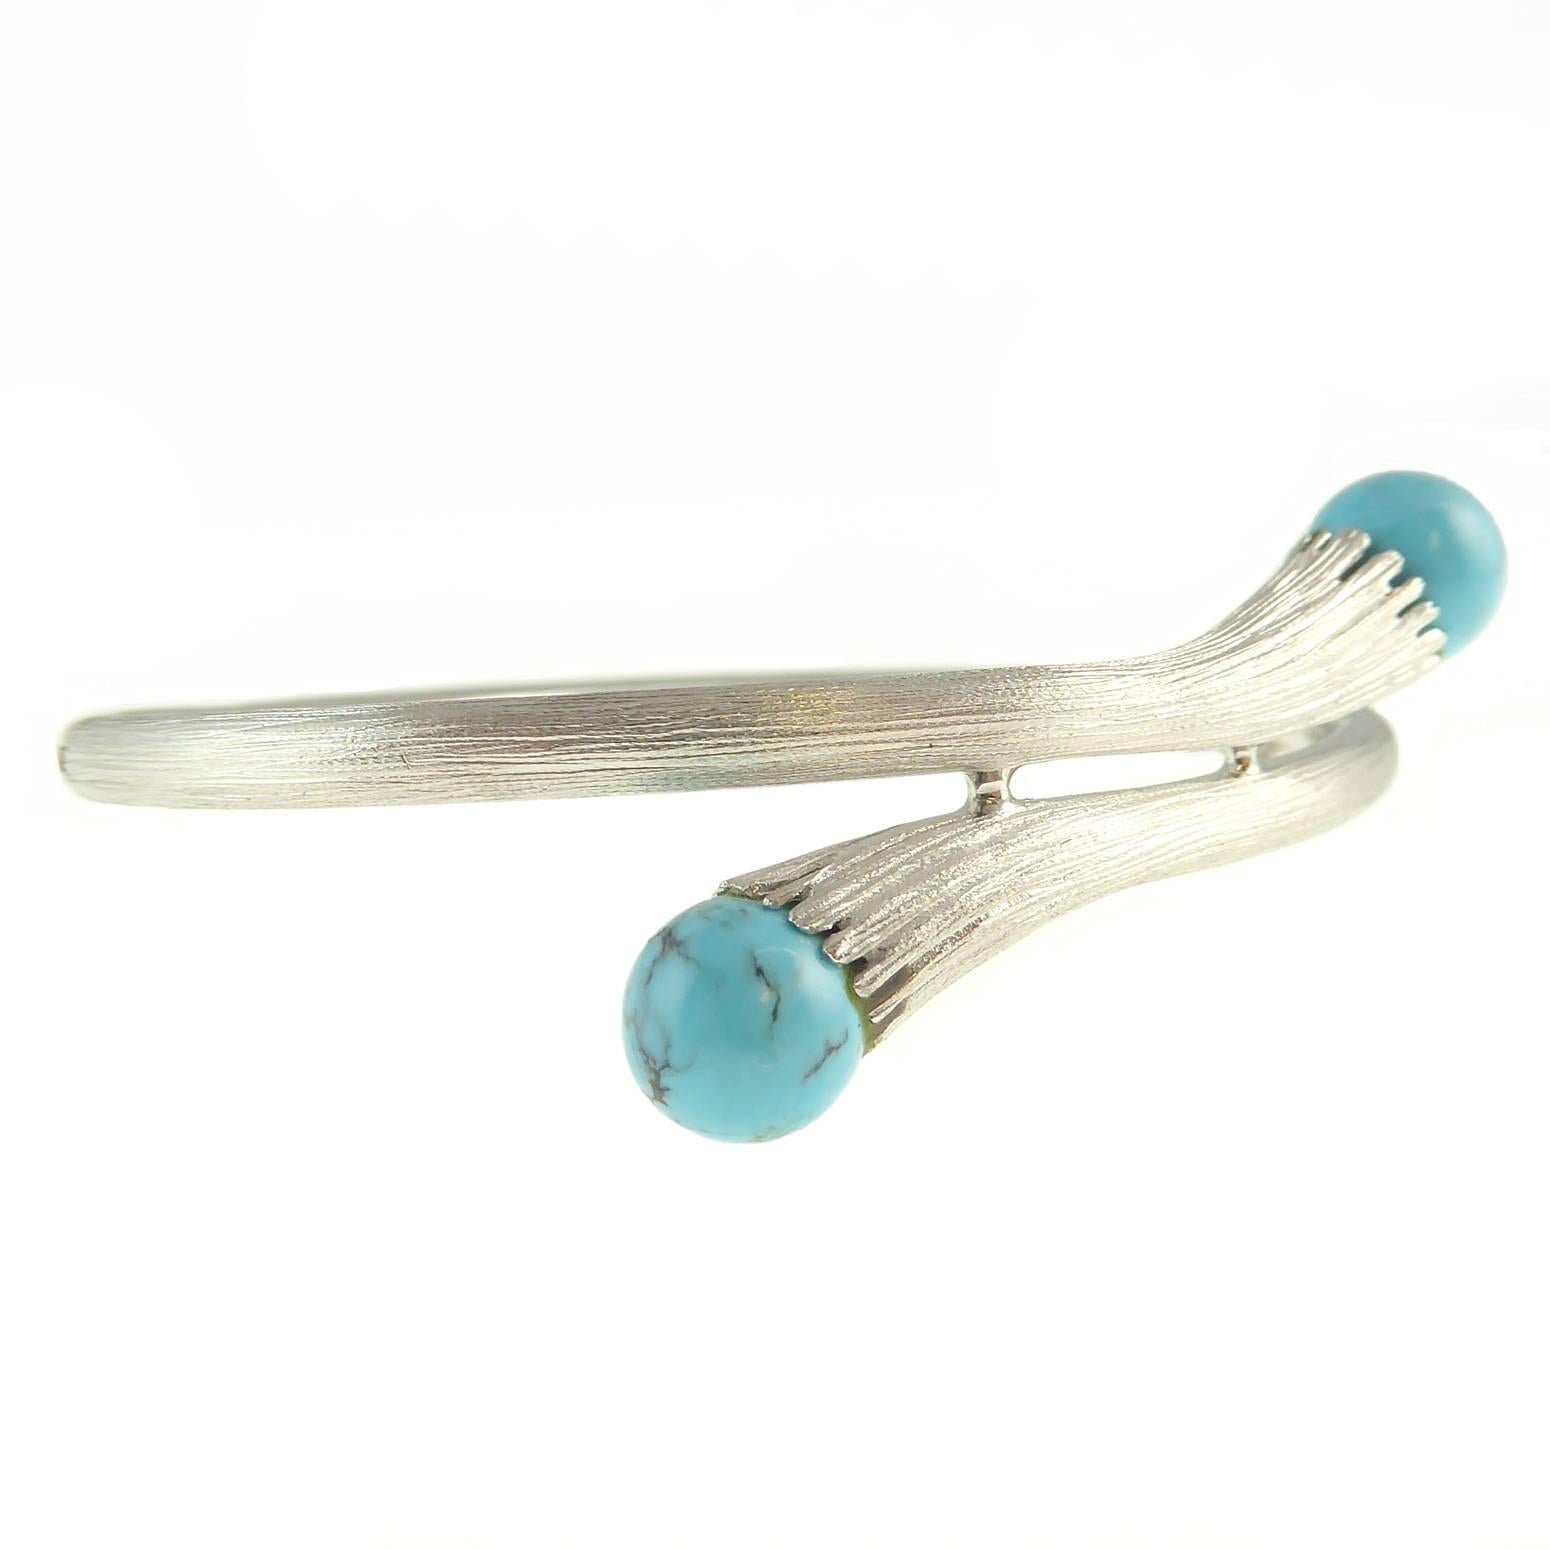 A retro white gold bangle in a pleasing form with a gently swirling cross-over design terminating in a round turquoise of good colour and interesting veining.  

The bangle is hollow, as was quite usual with this type of wrist wear, and displays a